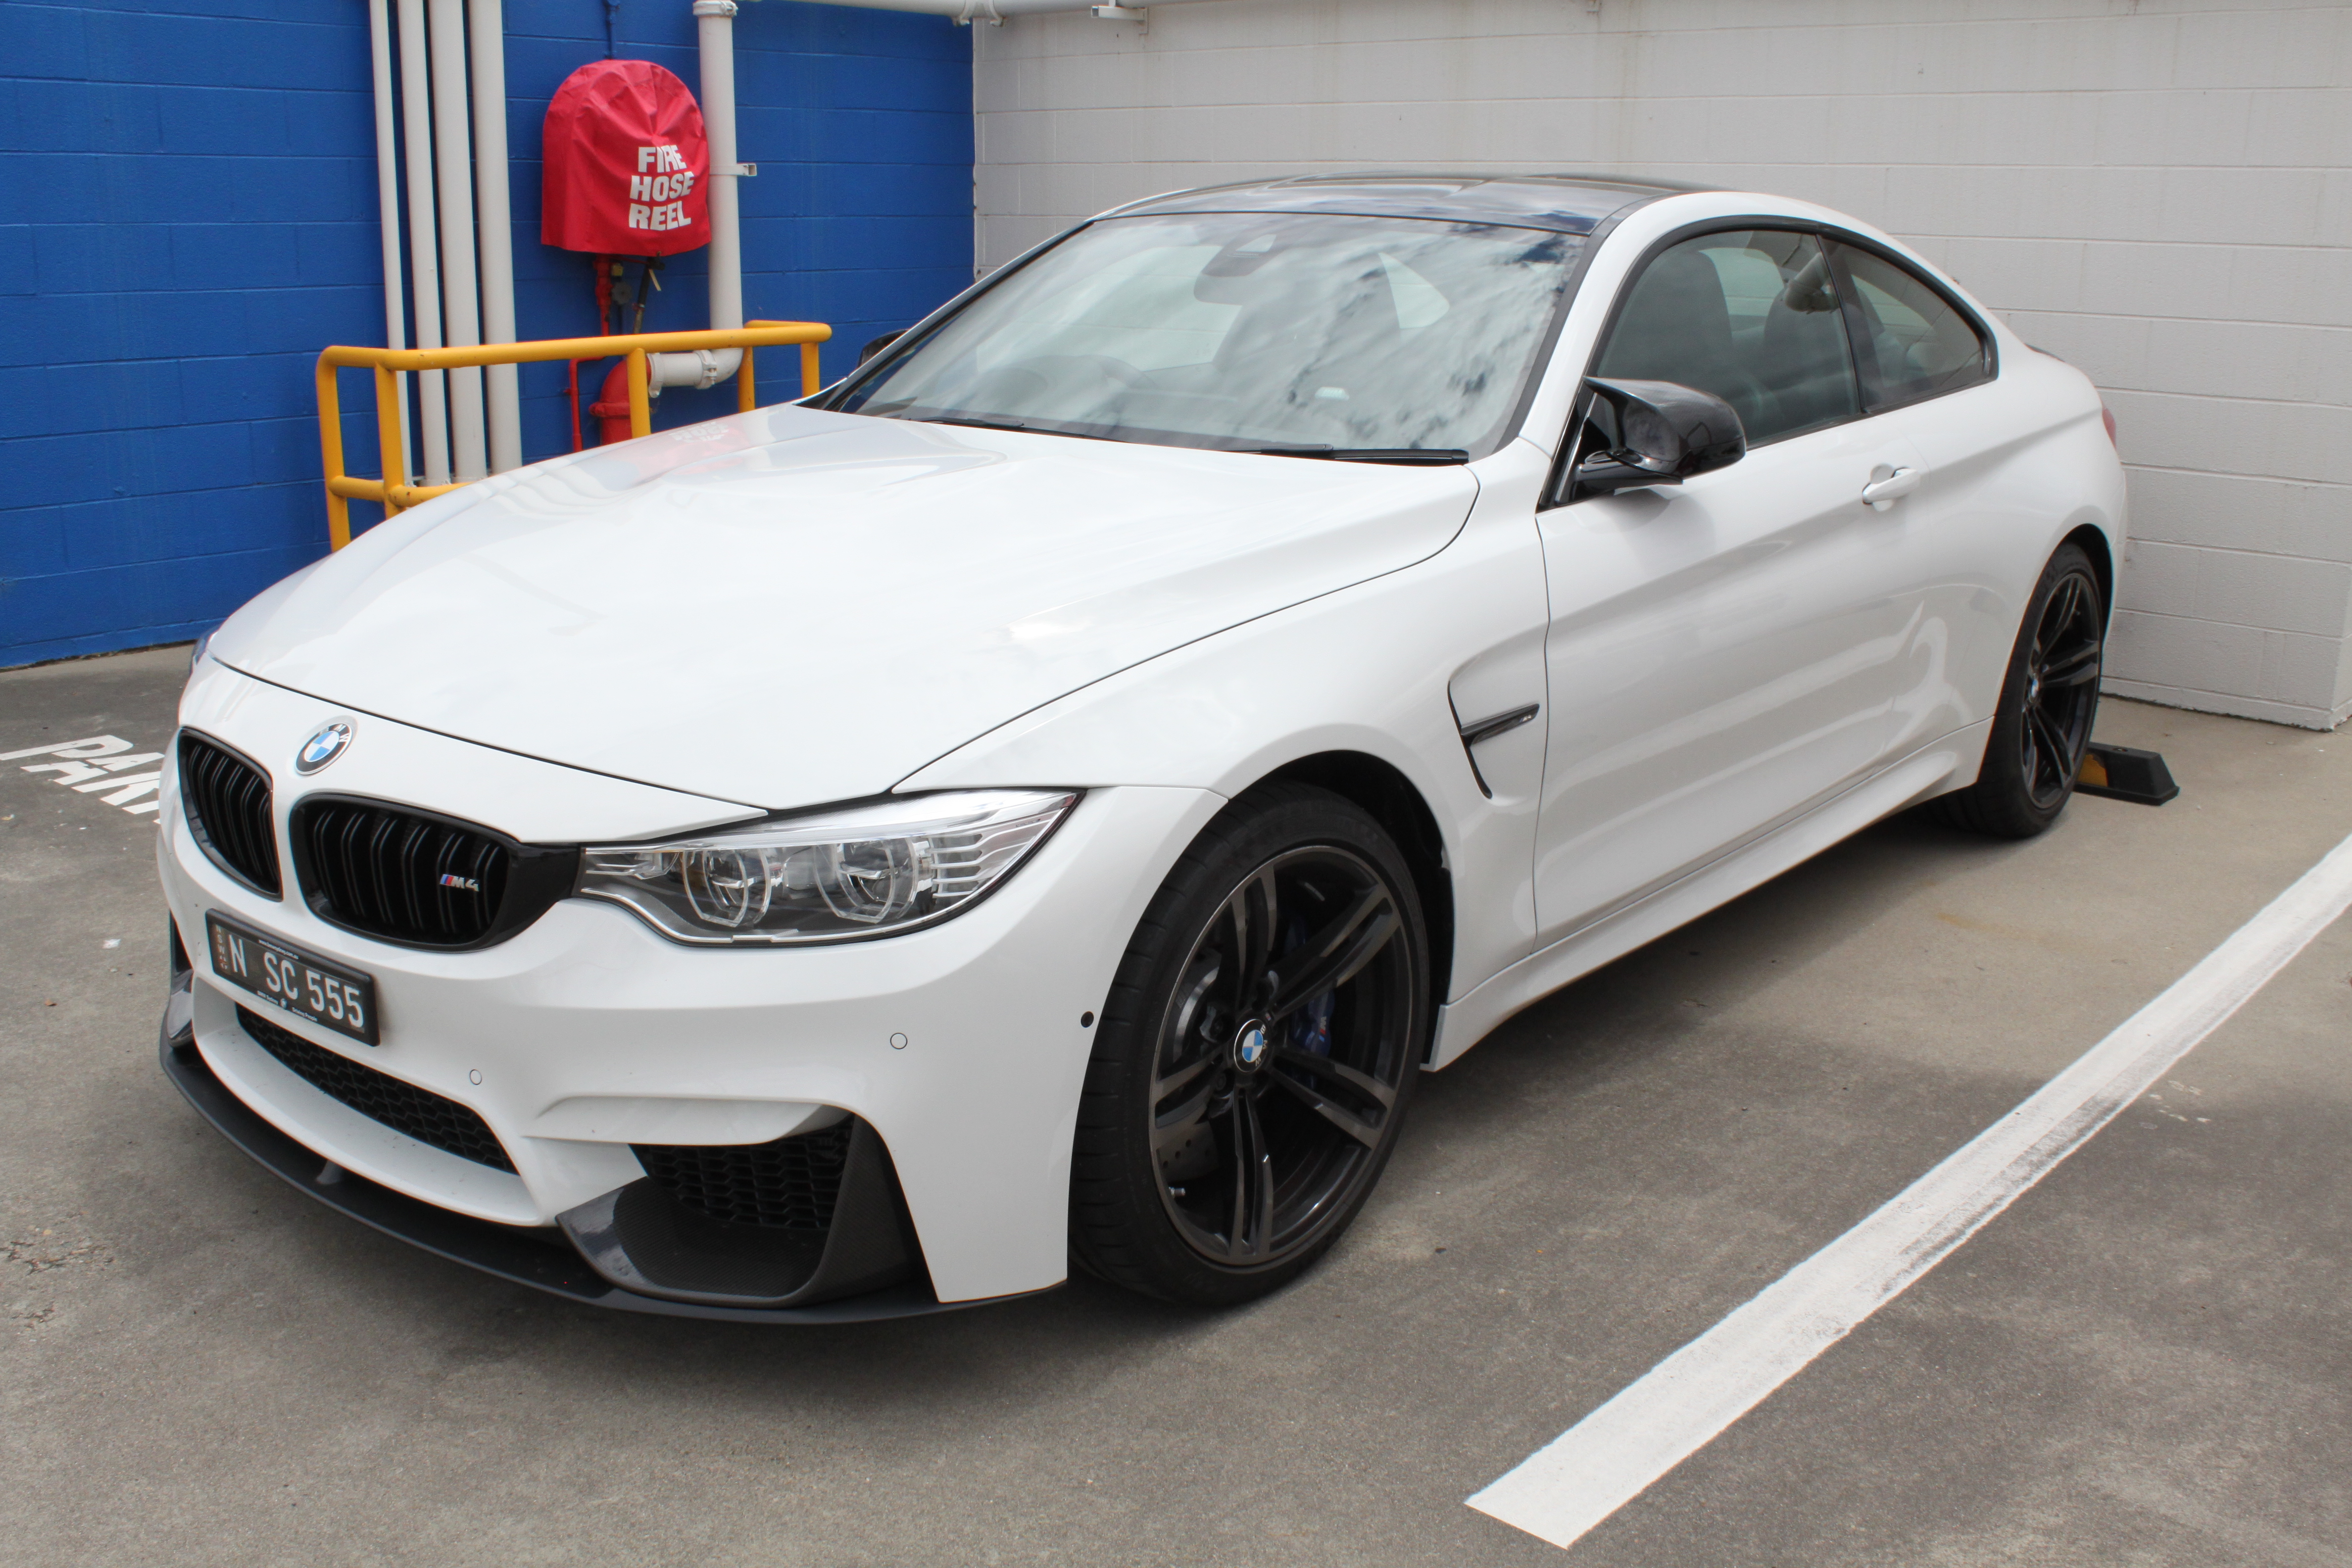 File:2015 BMW M4 (F82) coupe (24220553394).jpg - Wikimedia Commons